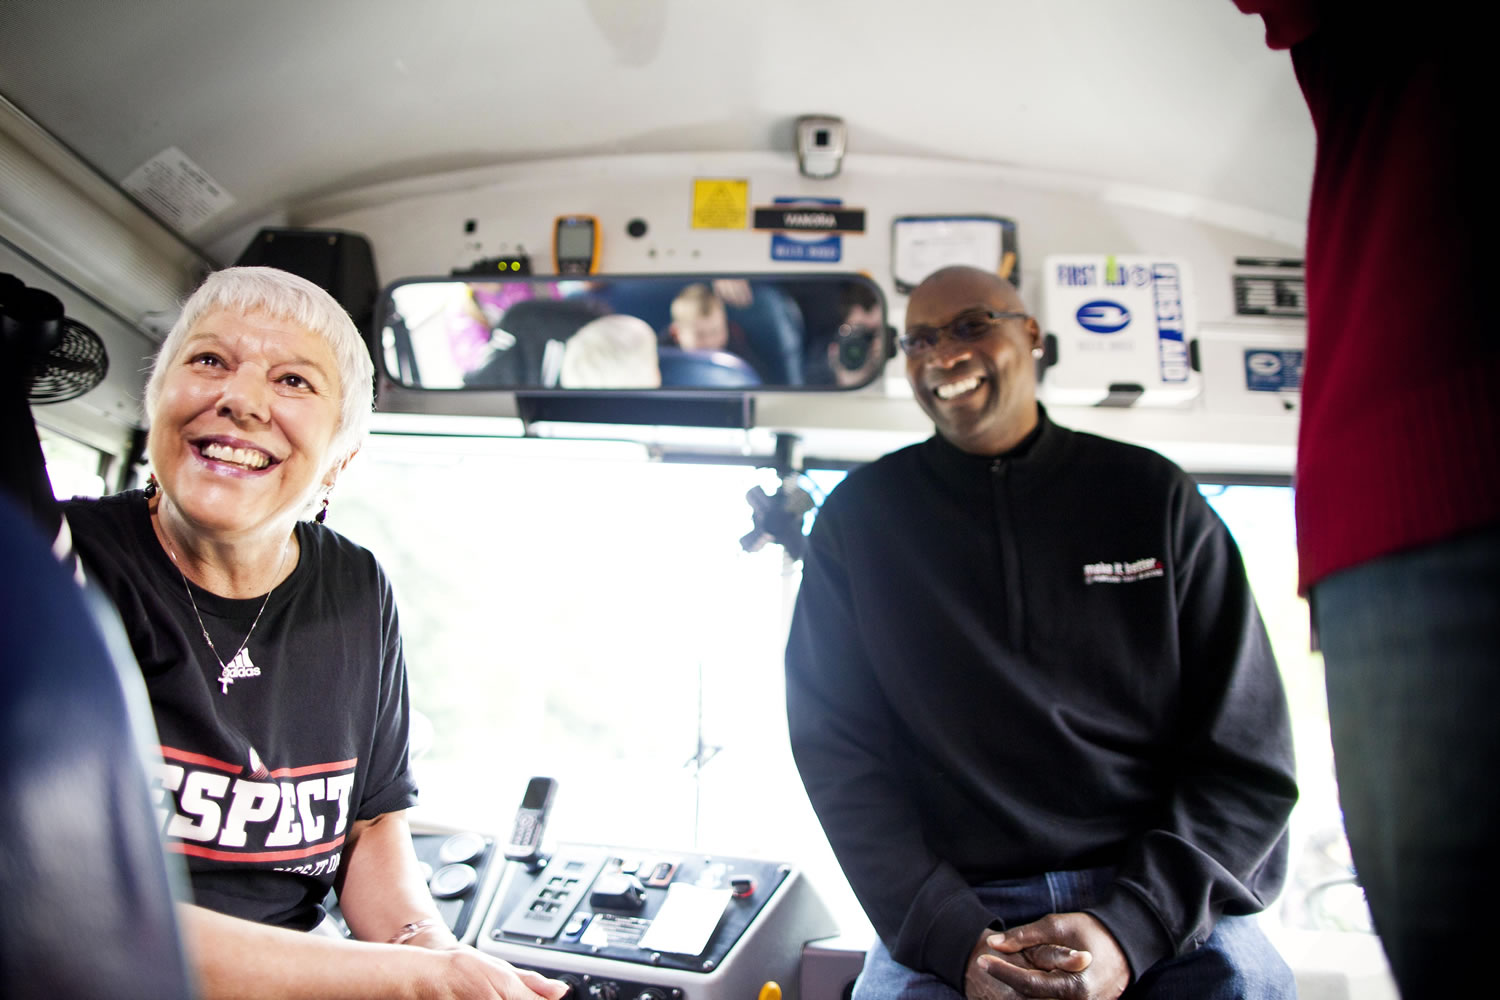 Ryan Prouty/Portland Trail Blazers
Vanora Volk, left, a bus driver for Vancouver Public Schools, gets a visit with former Portland Trail Blazer Jerome Kersey on her bus as she is honored for demonstrating the spirit of Damian Lillard's &quot;Respect, Pass It On&quot; program.